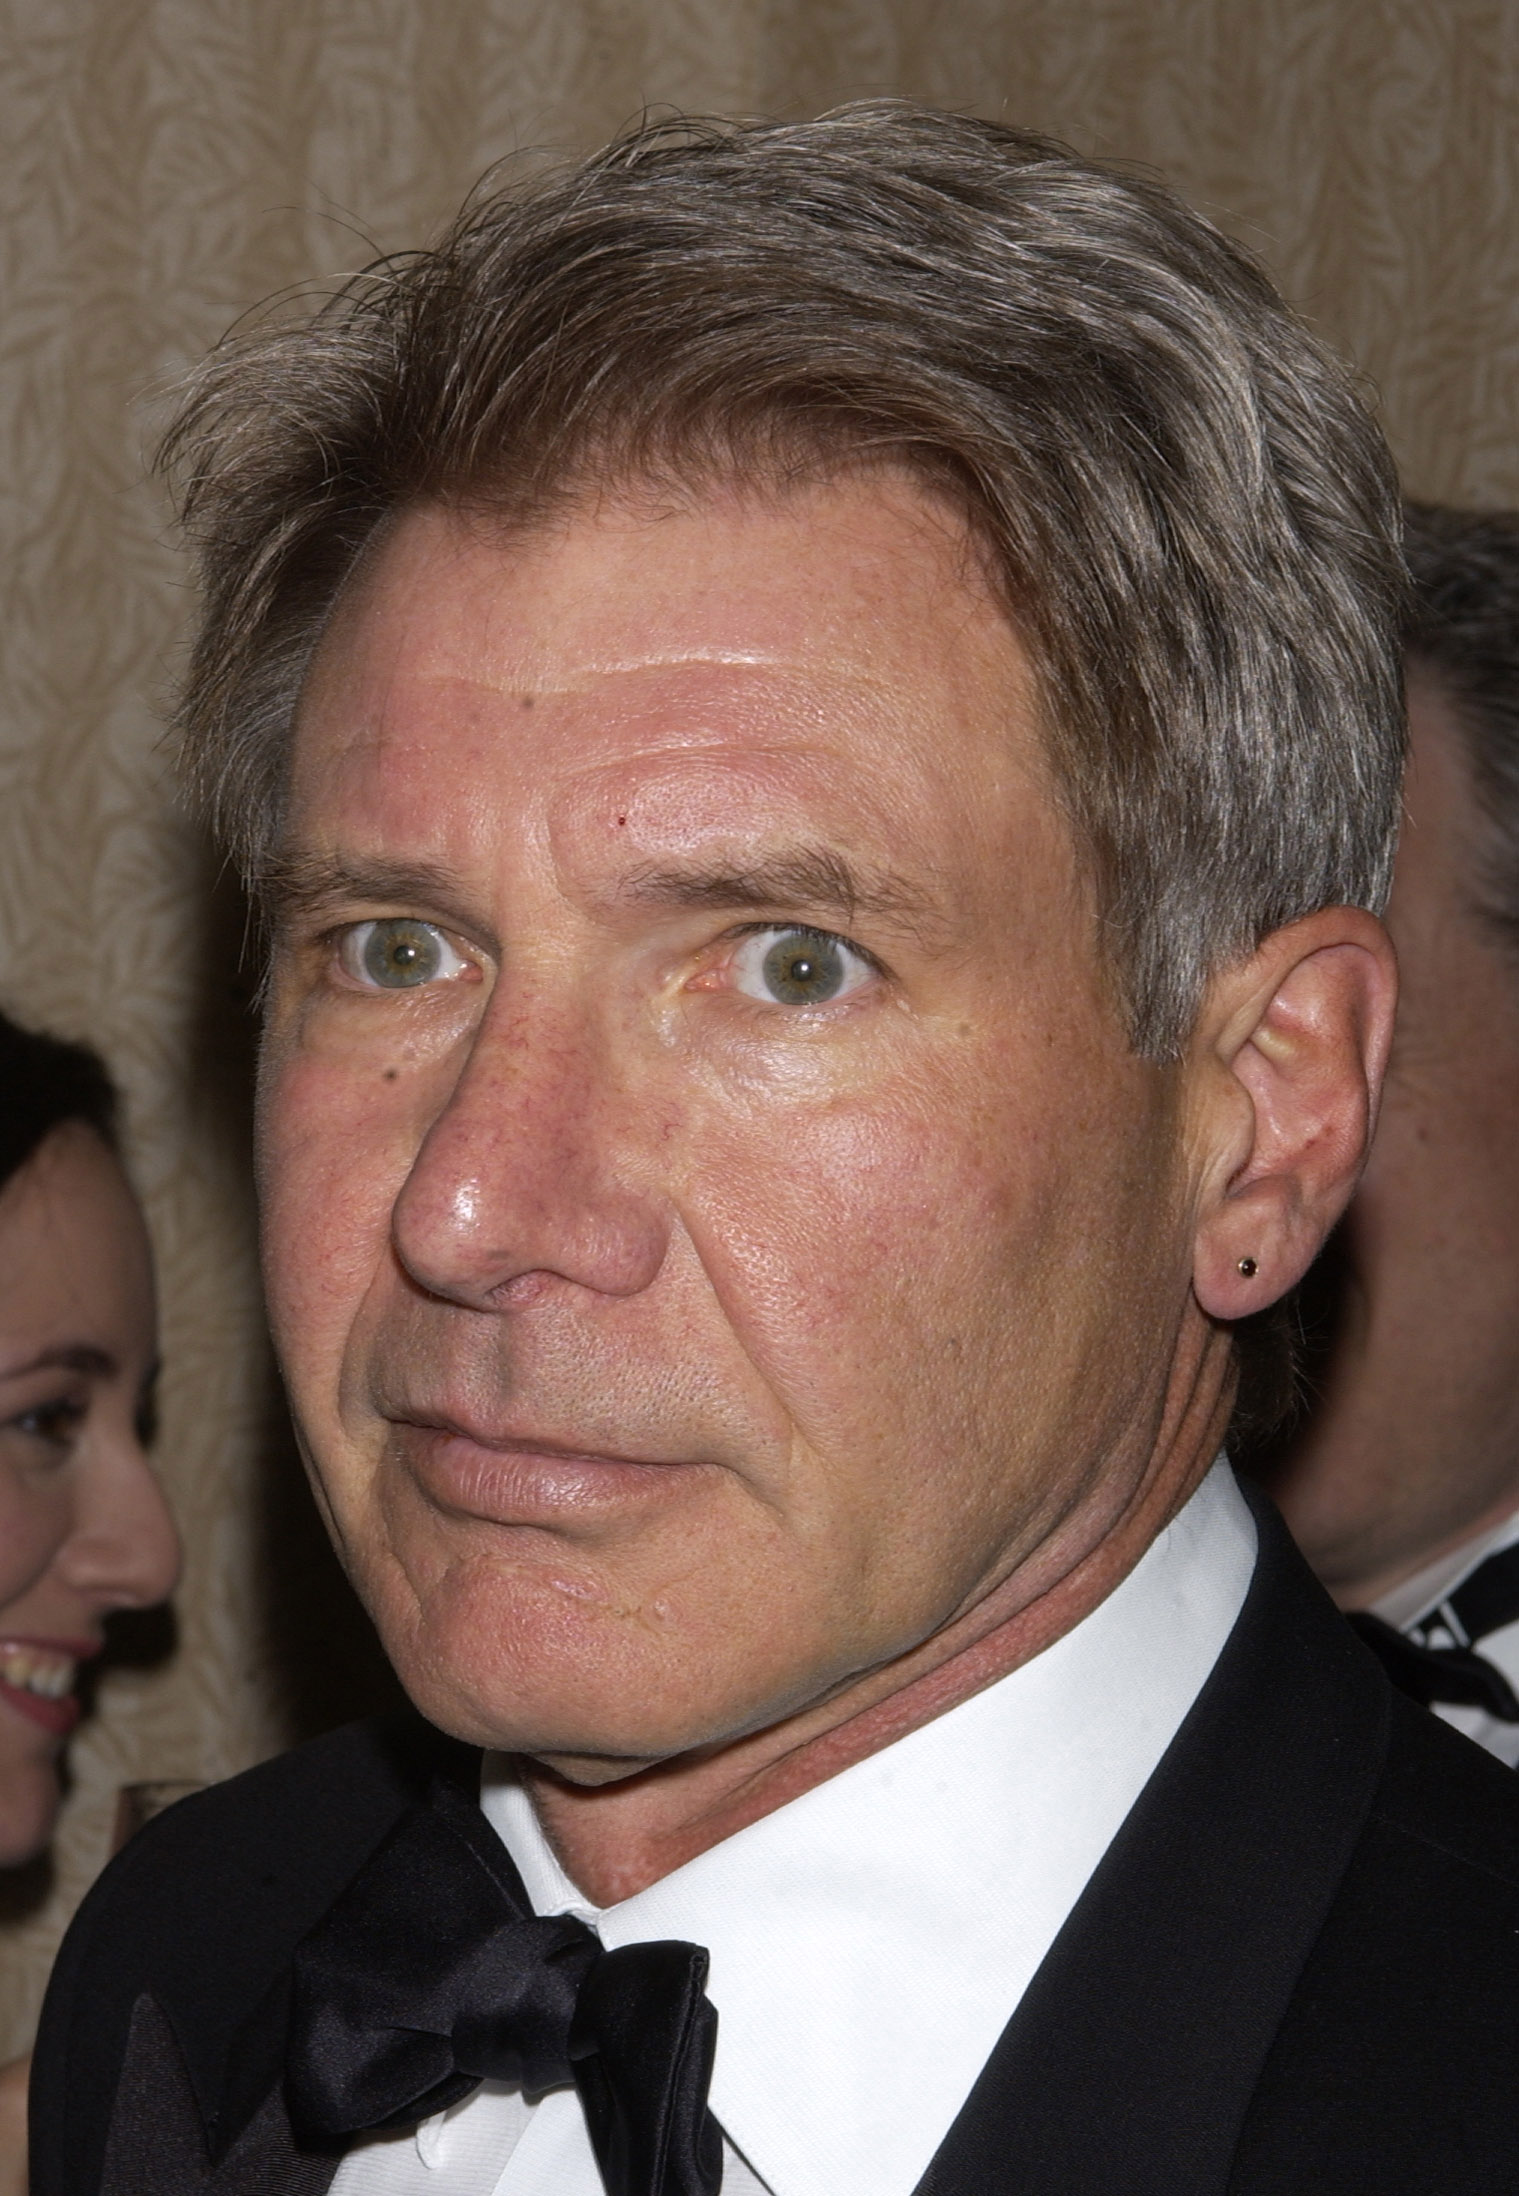 Harrison Ford attends a correspondents dinner on May 4, 2002 in Washington, DC | Source: Getty Images